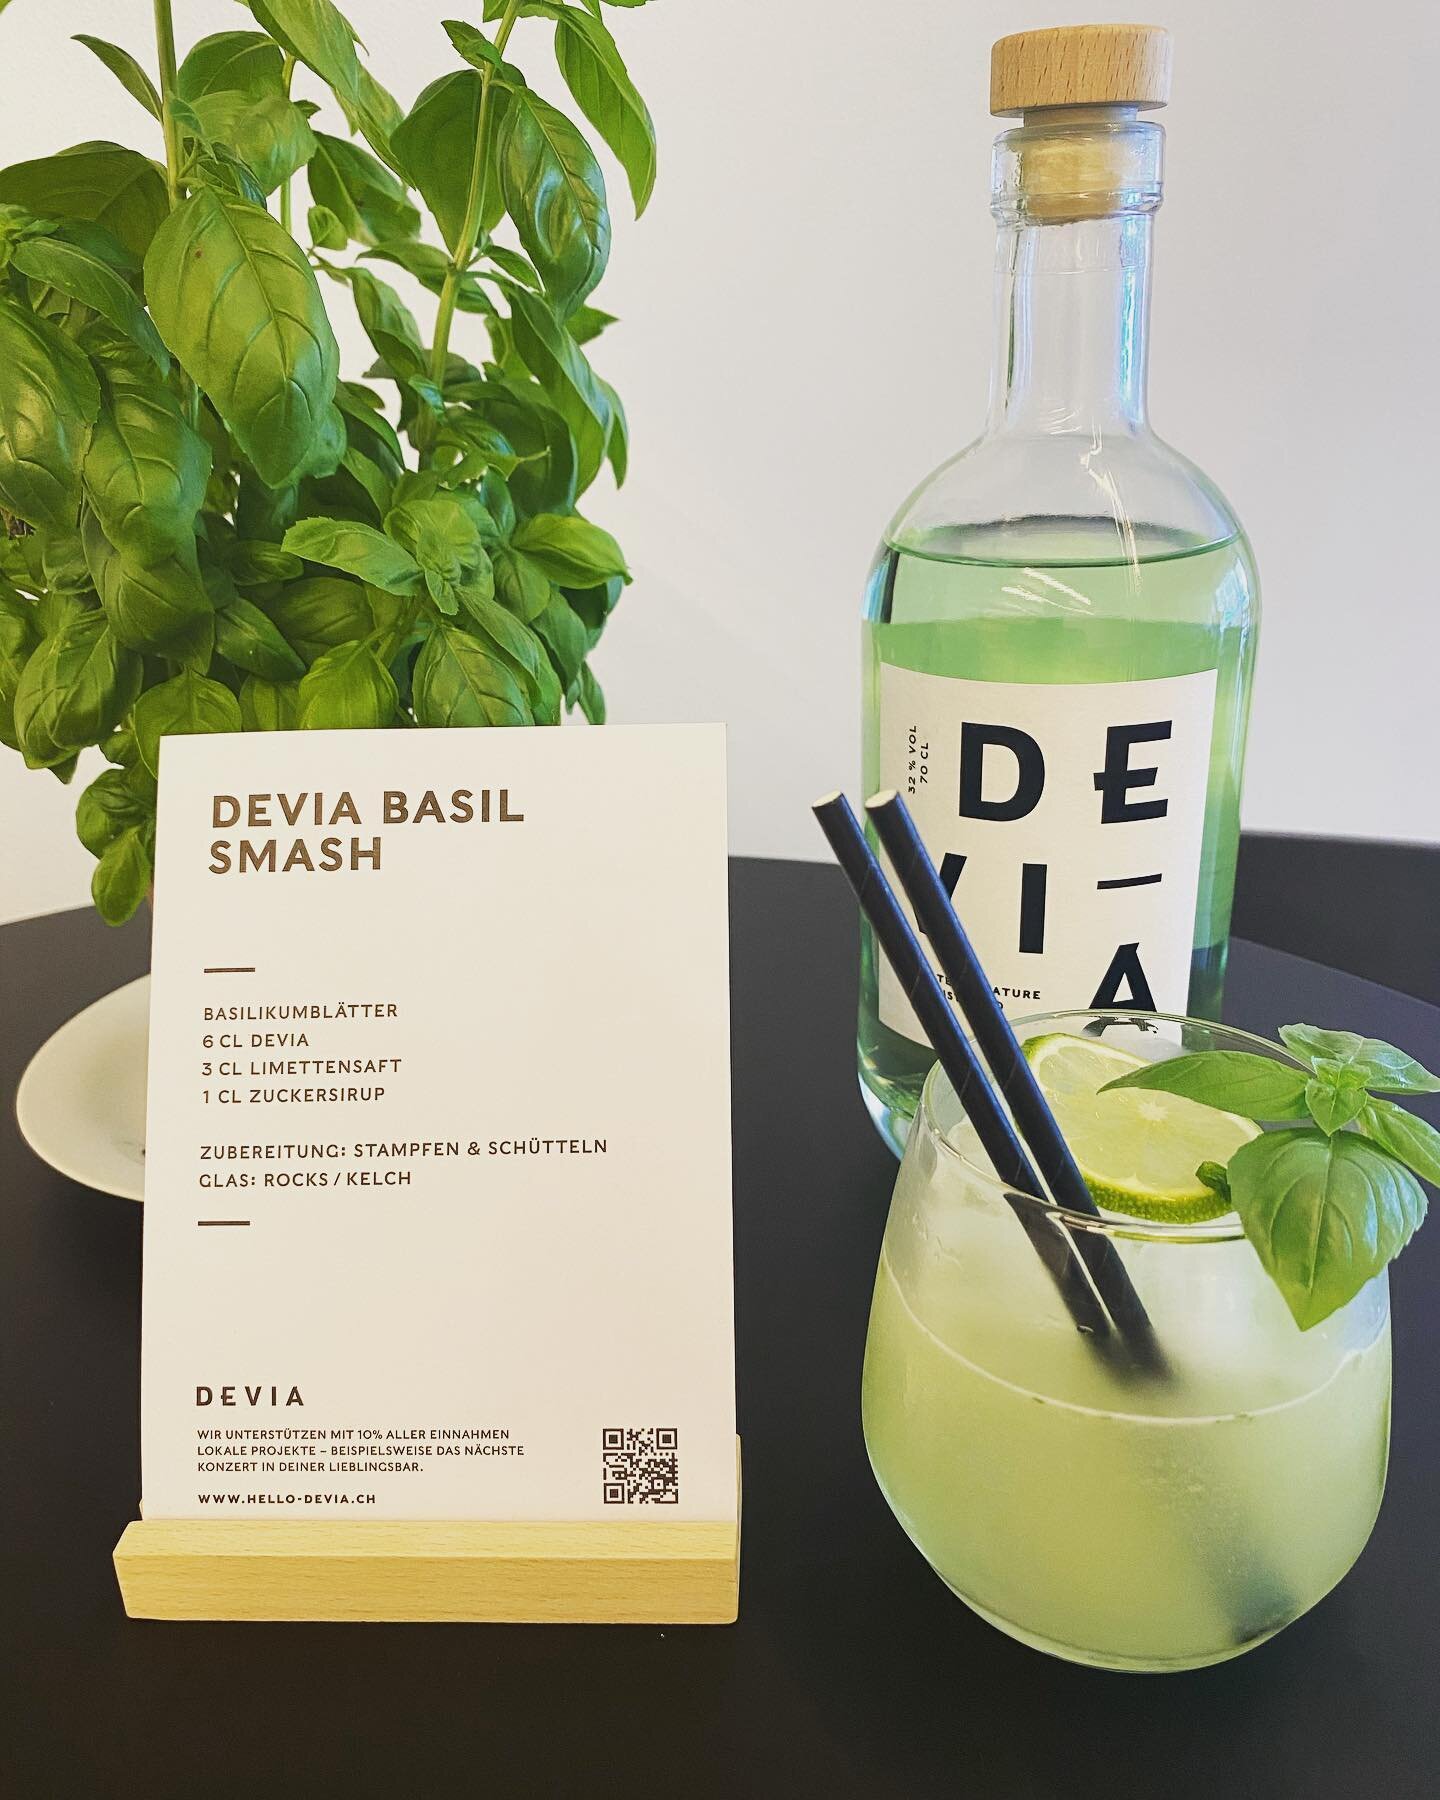 ✨🌱New in: Cocktails with @deviadrinks ! We&rsquo;re excited to offer some new, refreshing cocktails - perfect with tapas. 👌🏼🍸

#cocktails #drinks #cheers #happyhour #devia #seeland #local #tapas #lunch #apero #dinner